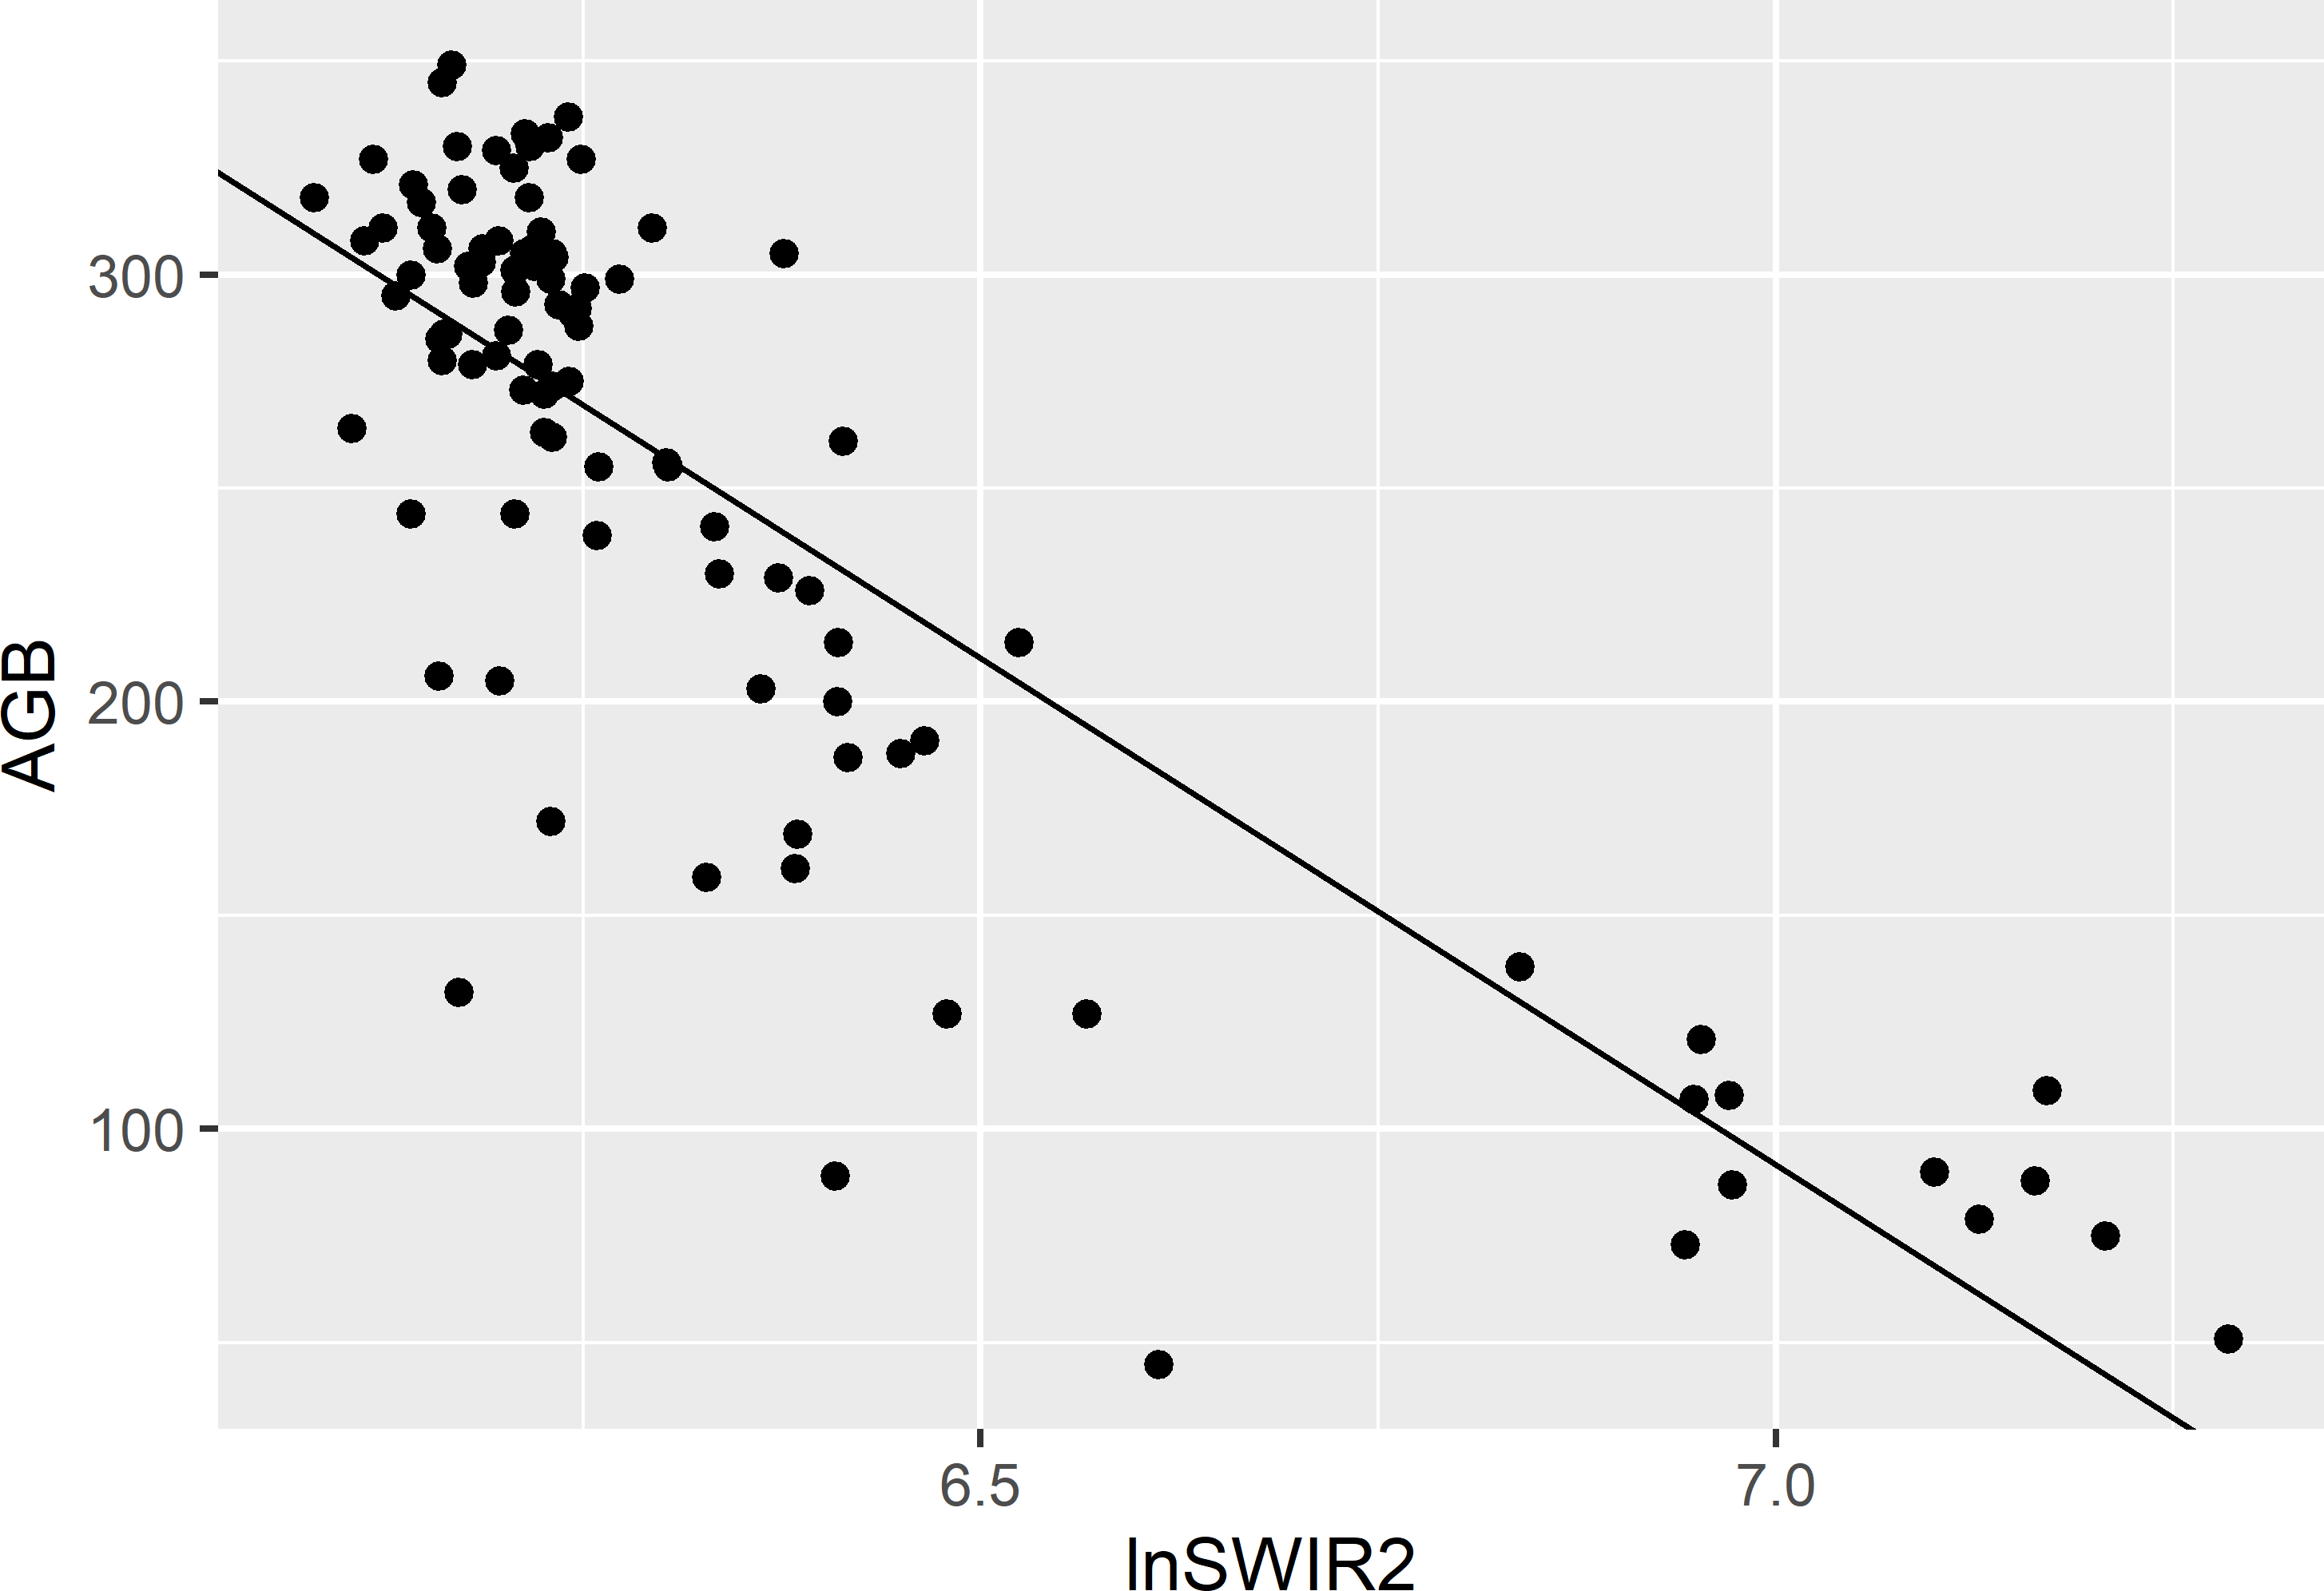 Scatter plot of AGB (109 kg ha-1) against lnSWIR2 of a simple random sample of size 100 from Eastern Amazonia and the fitted simple linear regression model for AGB.